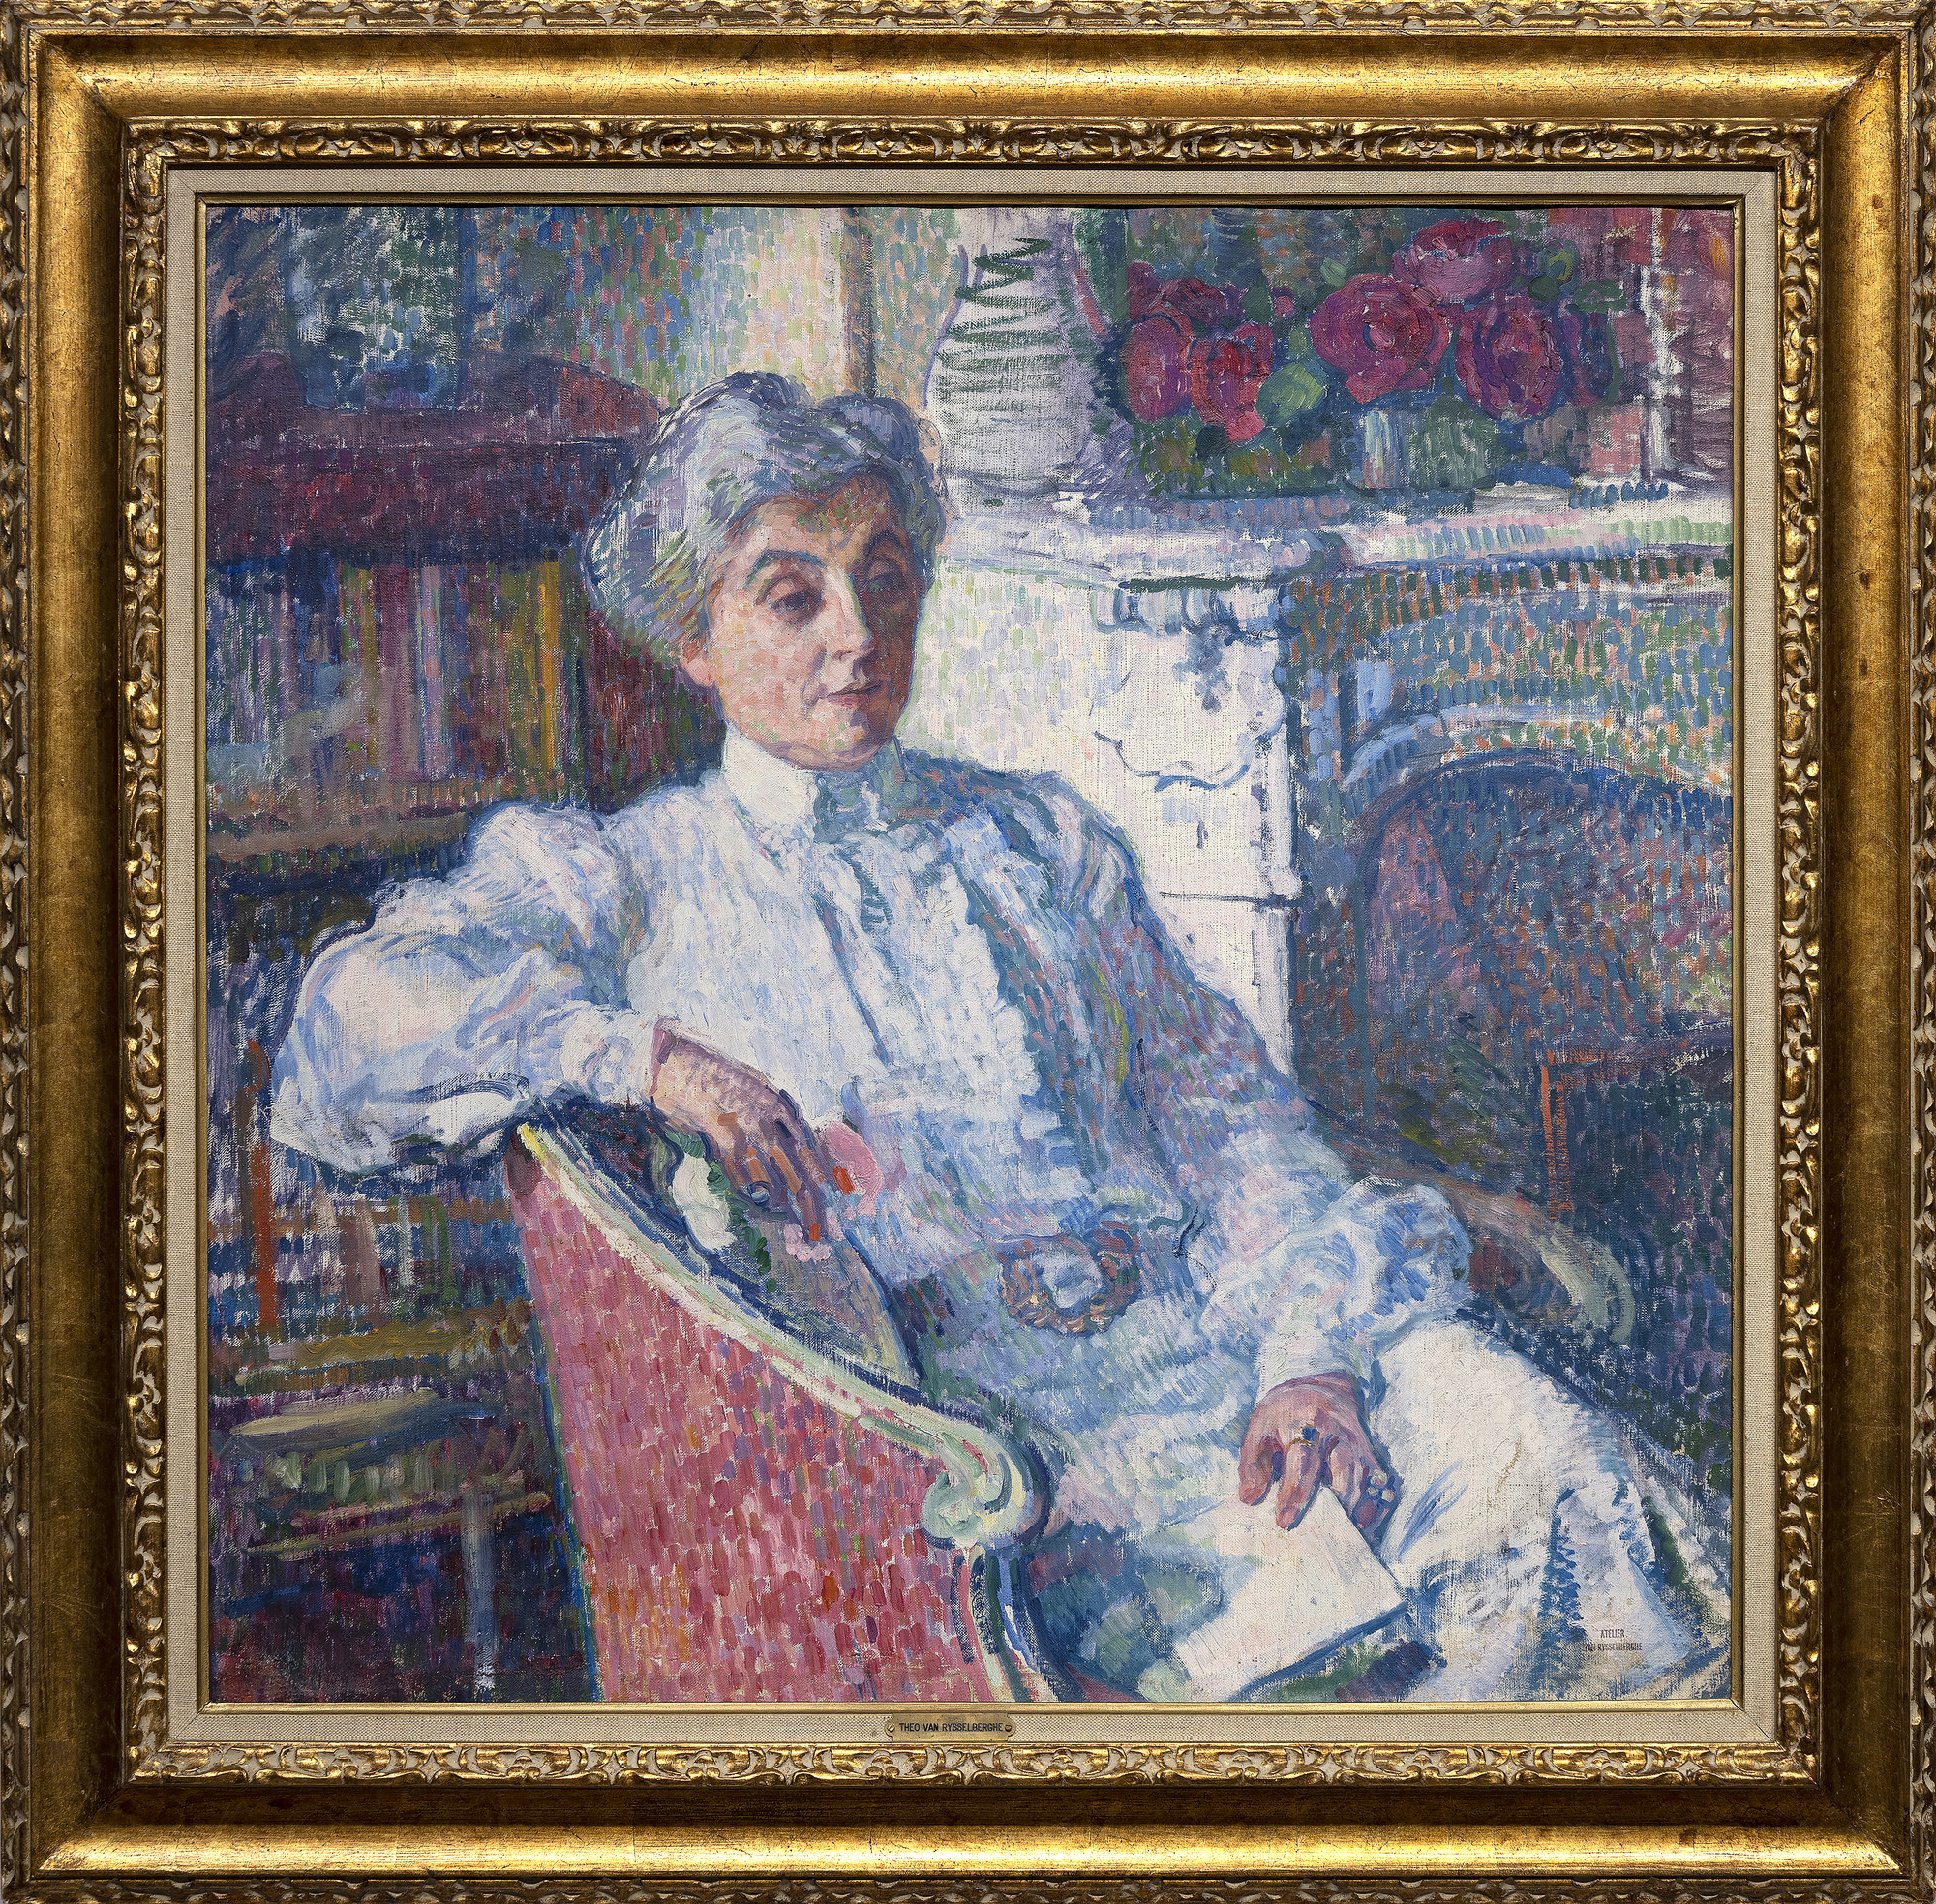 An undisputed master of the booming Belgian Neo-Impressionist movement from 1887 onward, Théo van Rysselberghe painted this portrait of his wife, Maria (née Monnom) during the first decade of the twentieth century. He had pressed onward from the influence of Whistler’s Tonalism, Impressionism, and the Pointillism of Seurat to perfect a highly refined understanding of color, its harmonic resonances, and a meticulous rendering of formal elements. An exemplary draftsman, optical impressions based on color interactions remained a principal concern for Van Rysselberghe. Here, short strokes of color replaced the small dots of a Pointillist, and the color scheme is not the homogenized, harmonious one for which the artist has a well-deserved reputation. Rather, this portrait advances color theory in an entirely different manner. Its visual interest rests with the dynamic contrasts of his wife’s silvered coiffure, her platinum-hued dress, and the stark-white fireplace mantle — all staged within the optical vibrancy of the surround dominated by complementary reds and greens. It is a visually stimulating demonstration by a painter who understood the dynamic impact of this unusual color scheme and who arranged the sitter with a strong accent on a diagonal and executed the formula with the craft and agility of a painter in full control of his painterly assets.